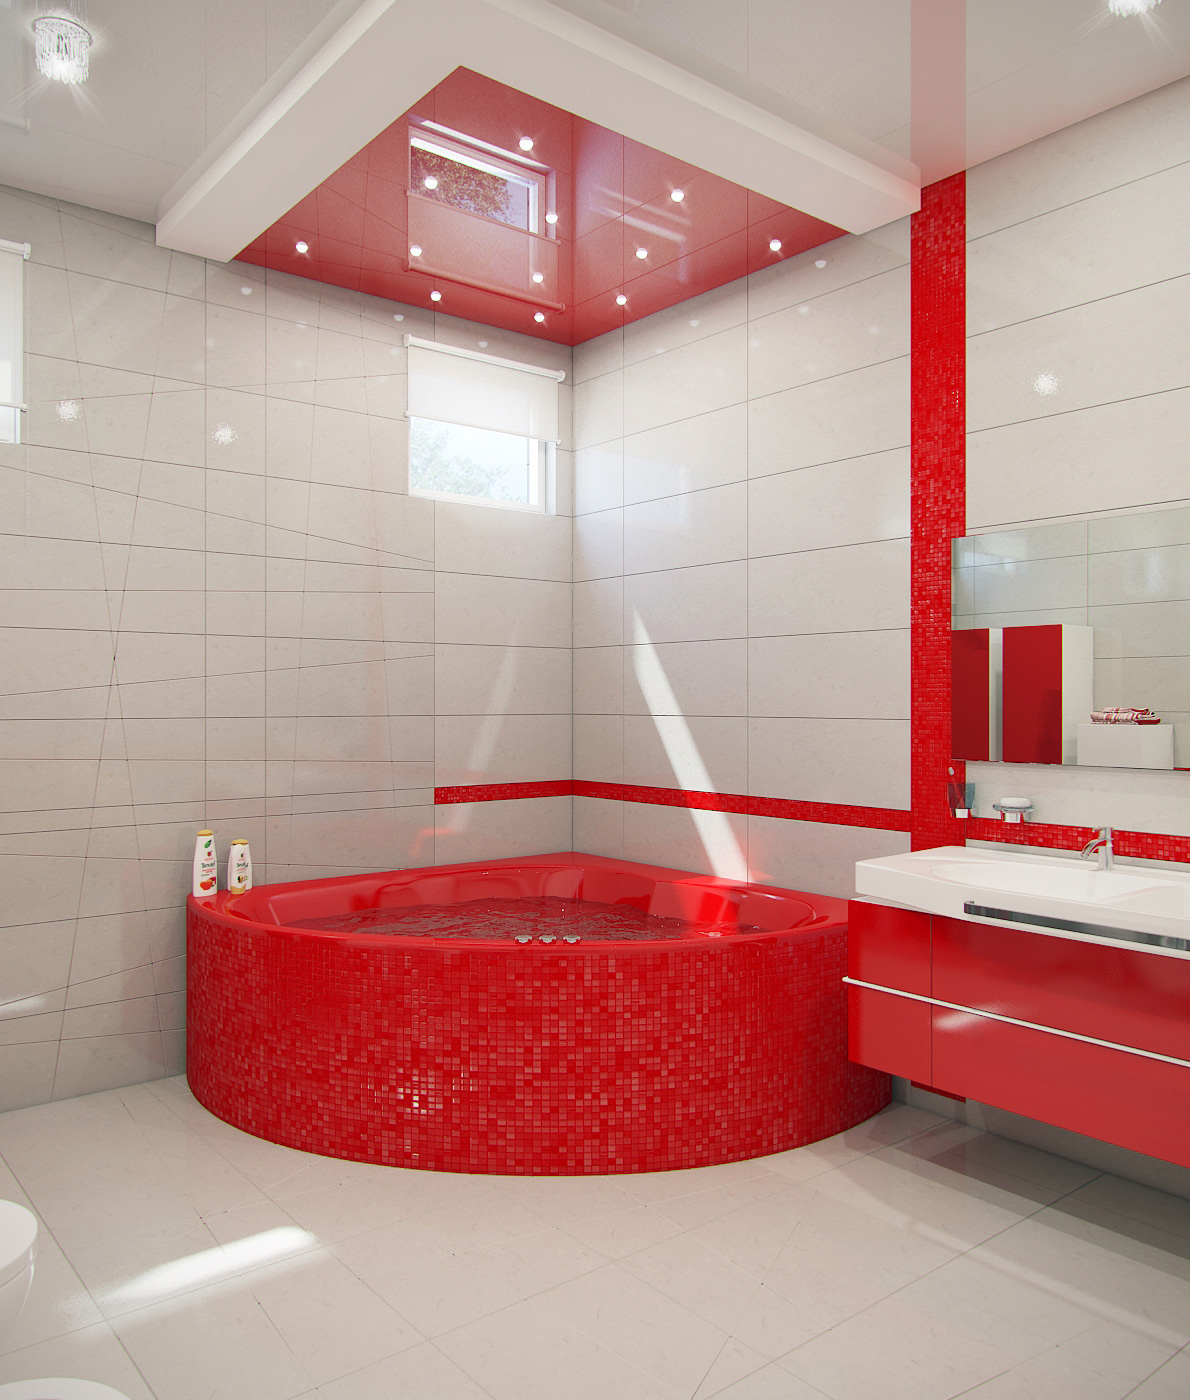 variant of the bright interior of the white bathroom